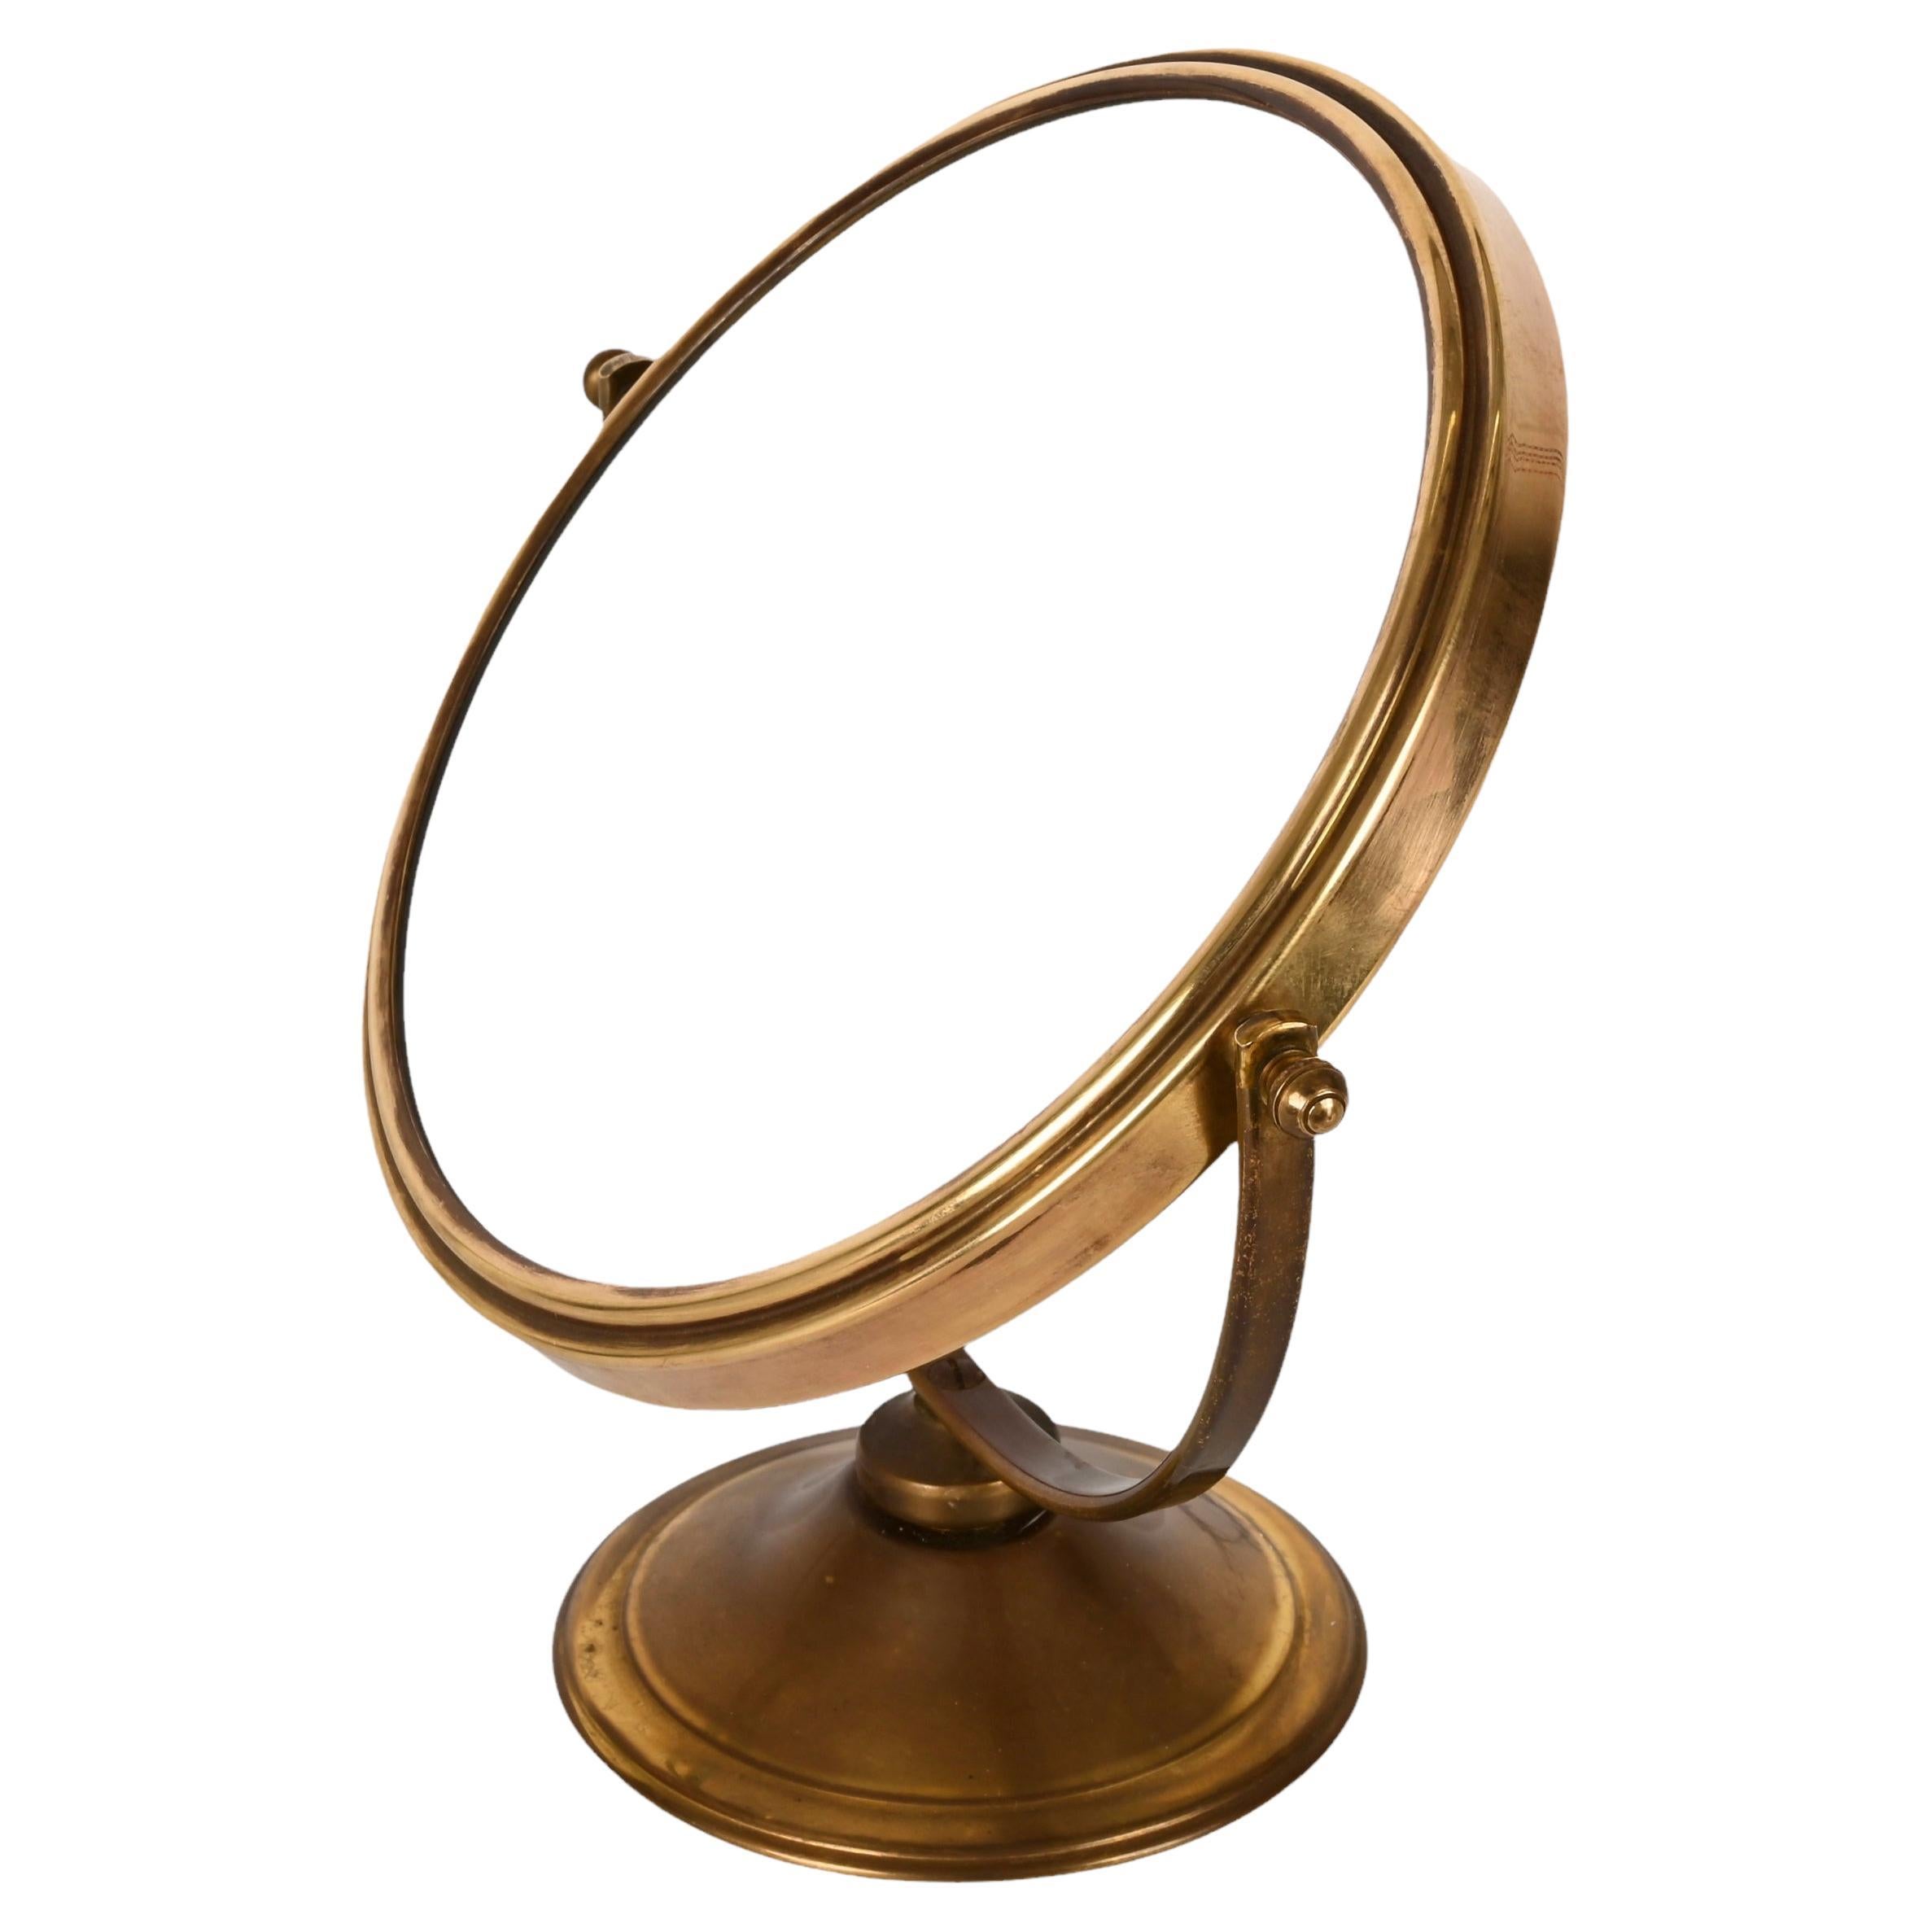 Magnificent midcentury double-sided adjustable and magnified brass vanity table mirror. This fantastic piece was designed in Italy during the 1960s.

This piece is mind-blowing because of its brass structure, plus it is fully adjustable and the